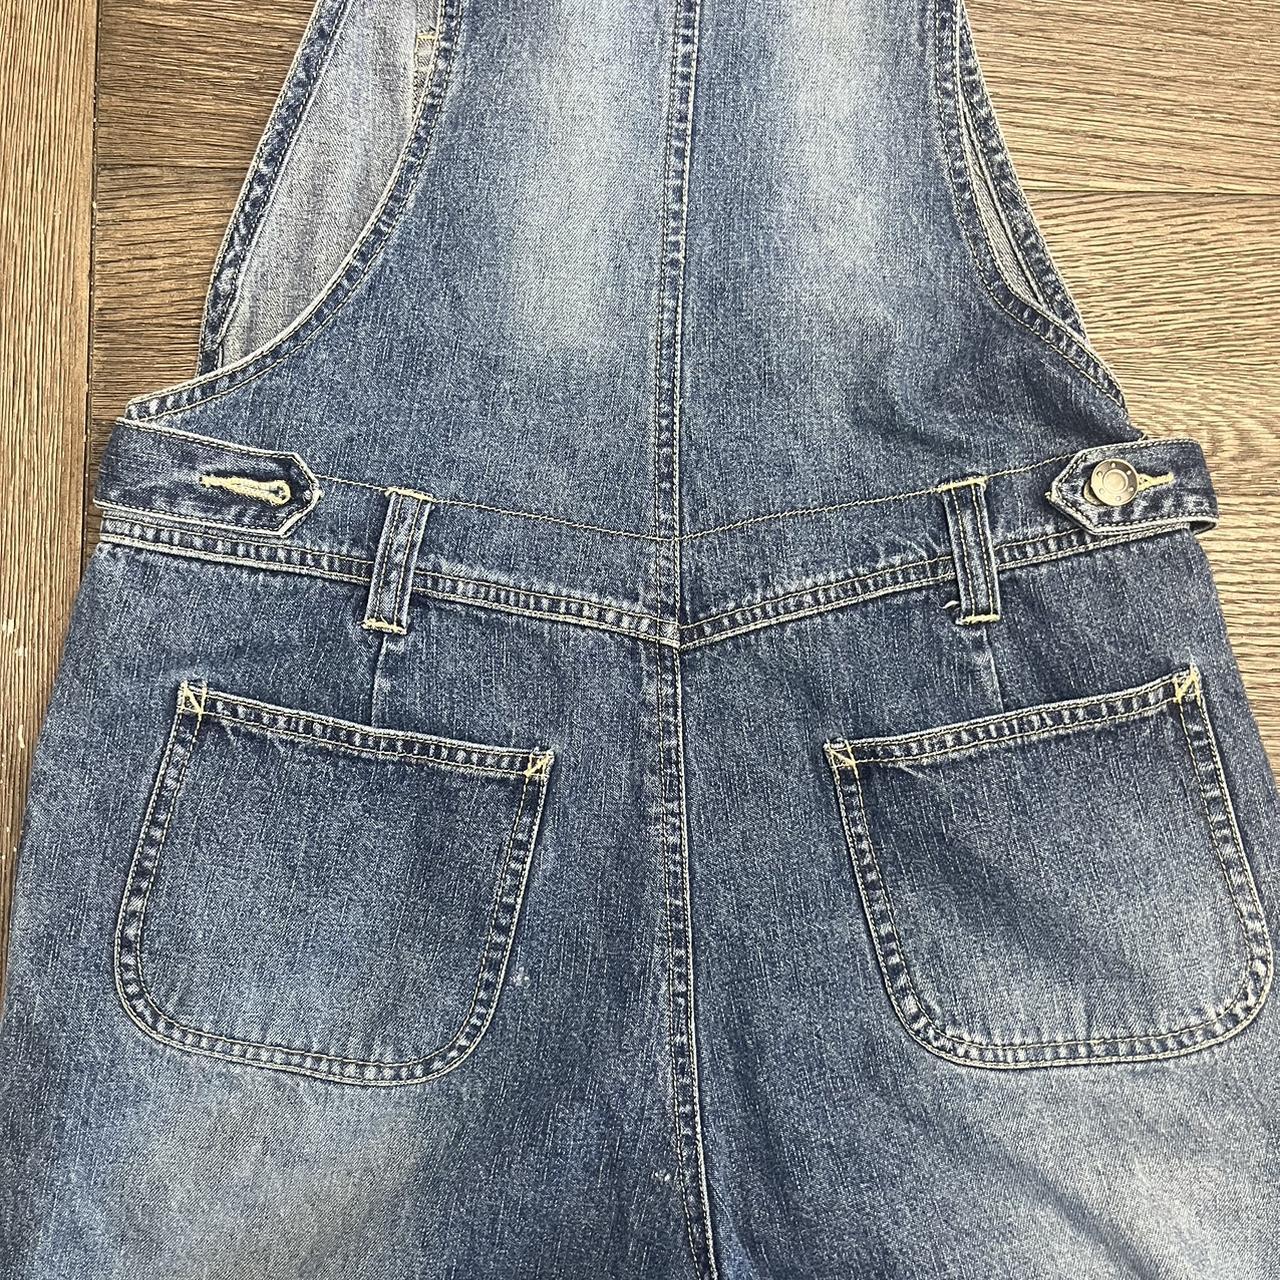 Vintage Xhilaration short overalls 🧡, Small, They have